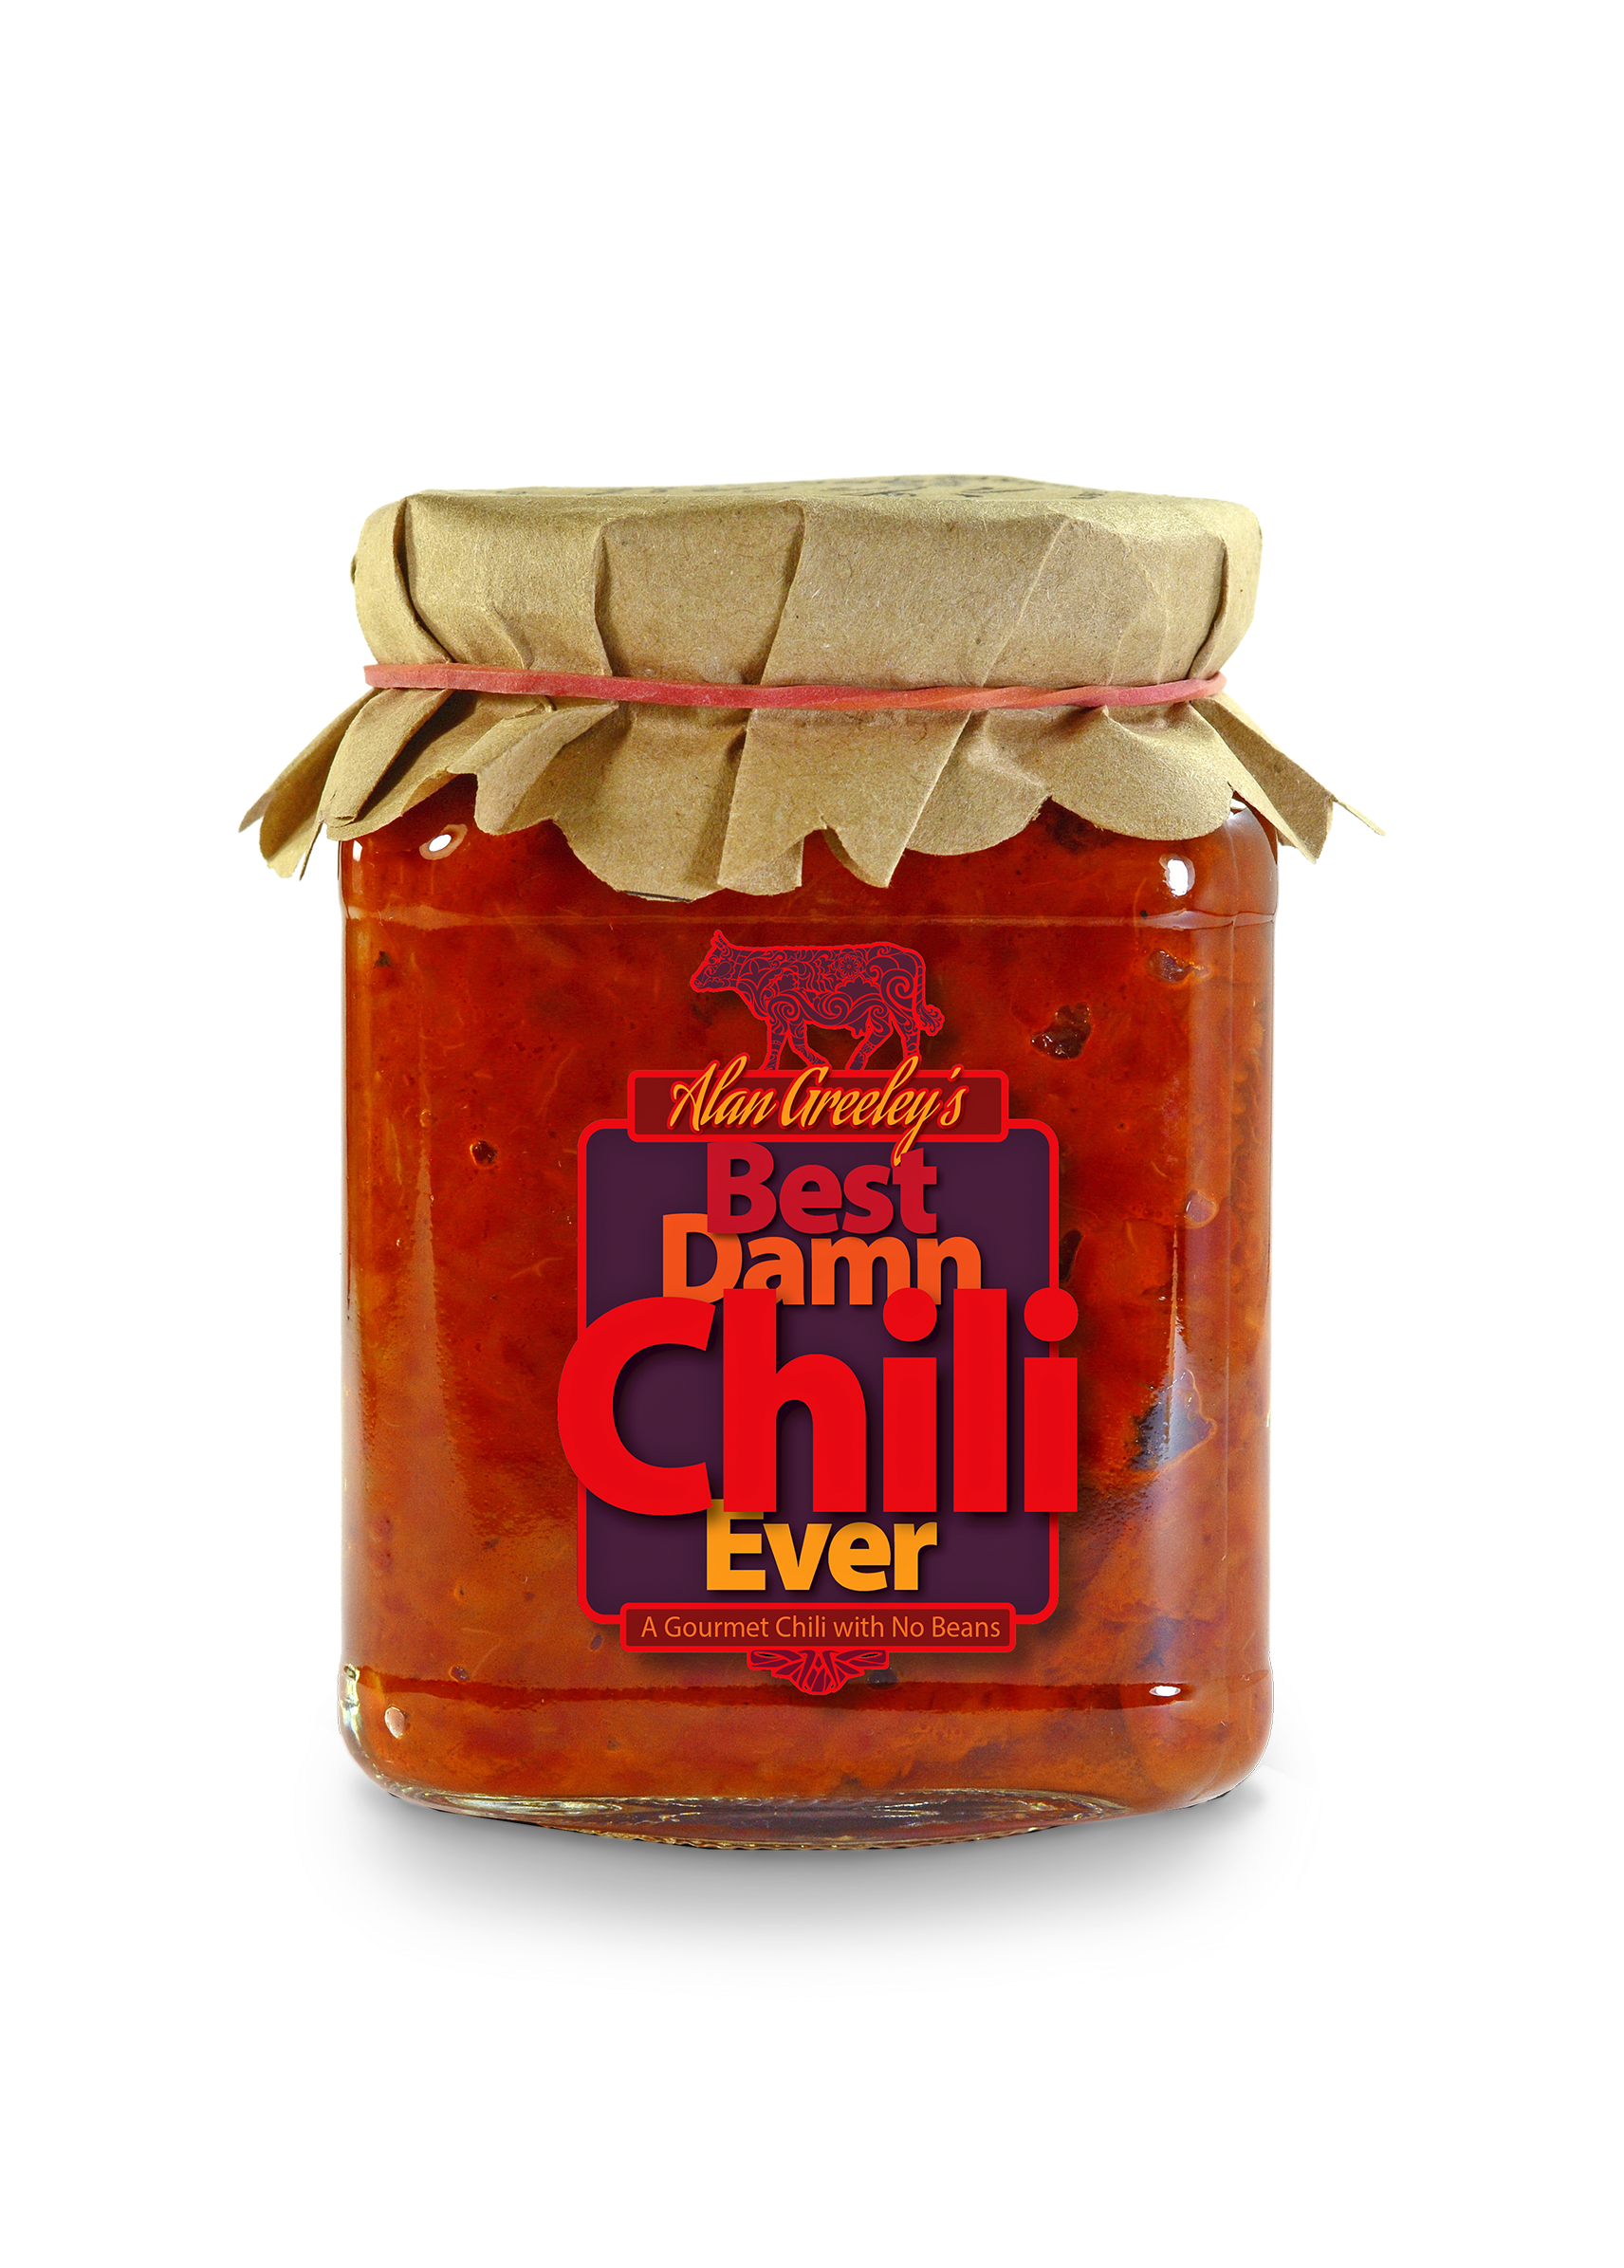 packaging for gourmet chili